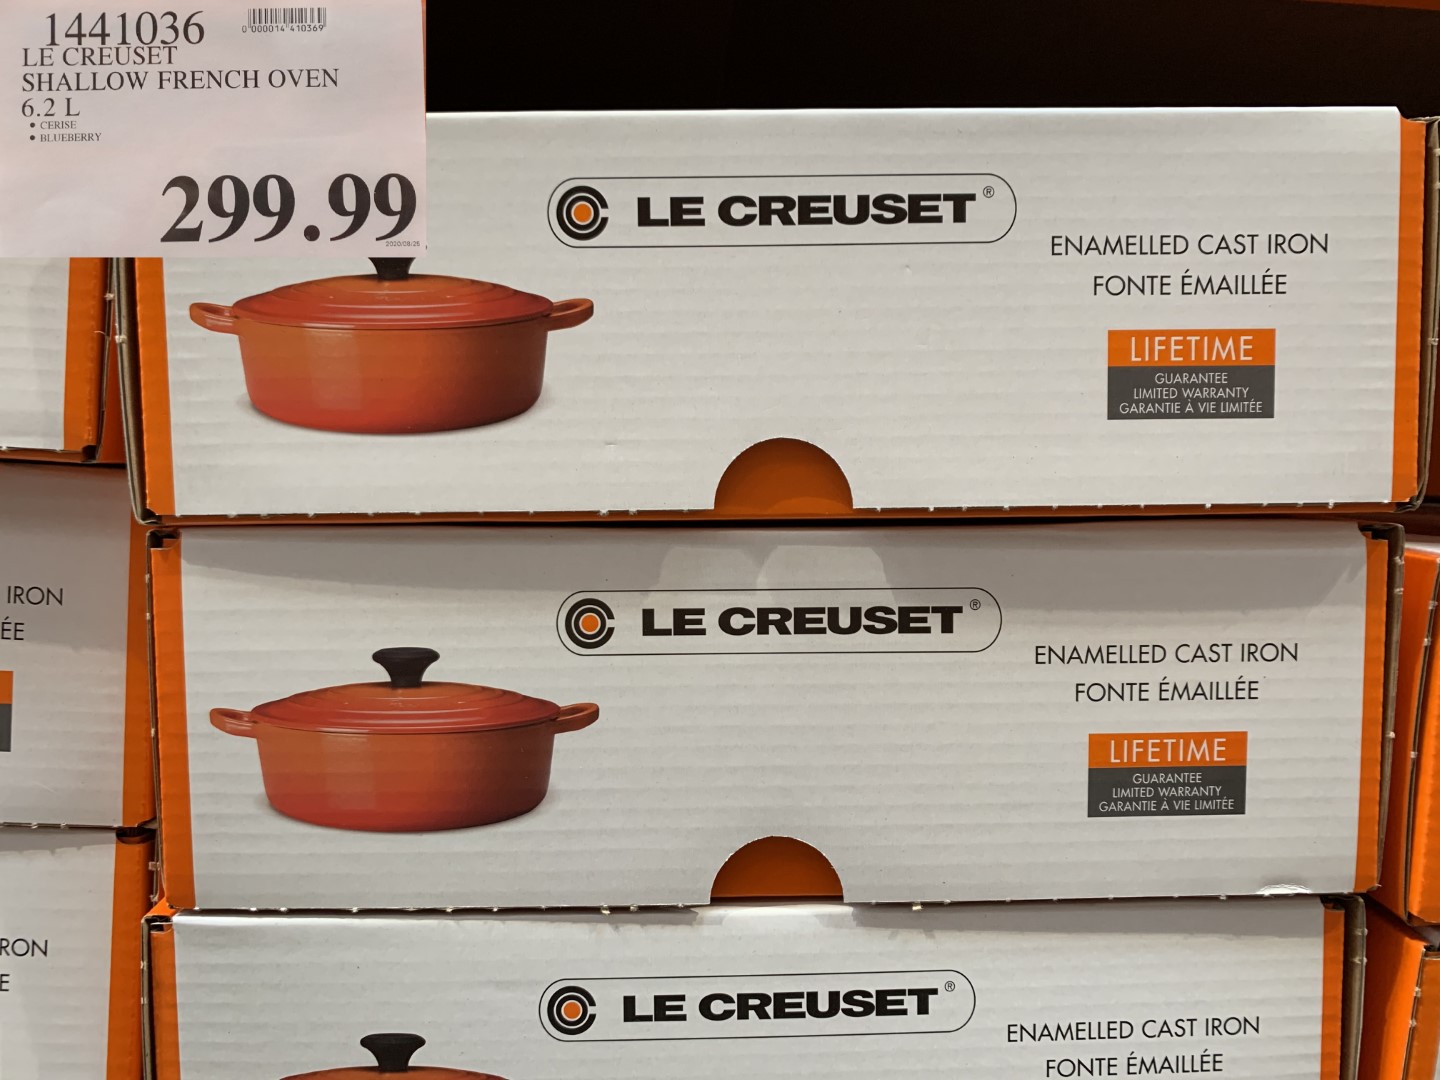 Or creuset